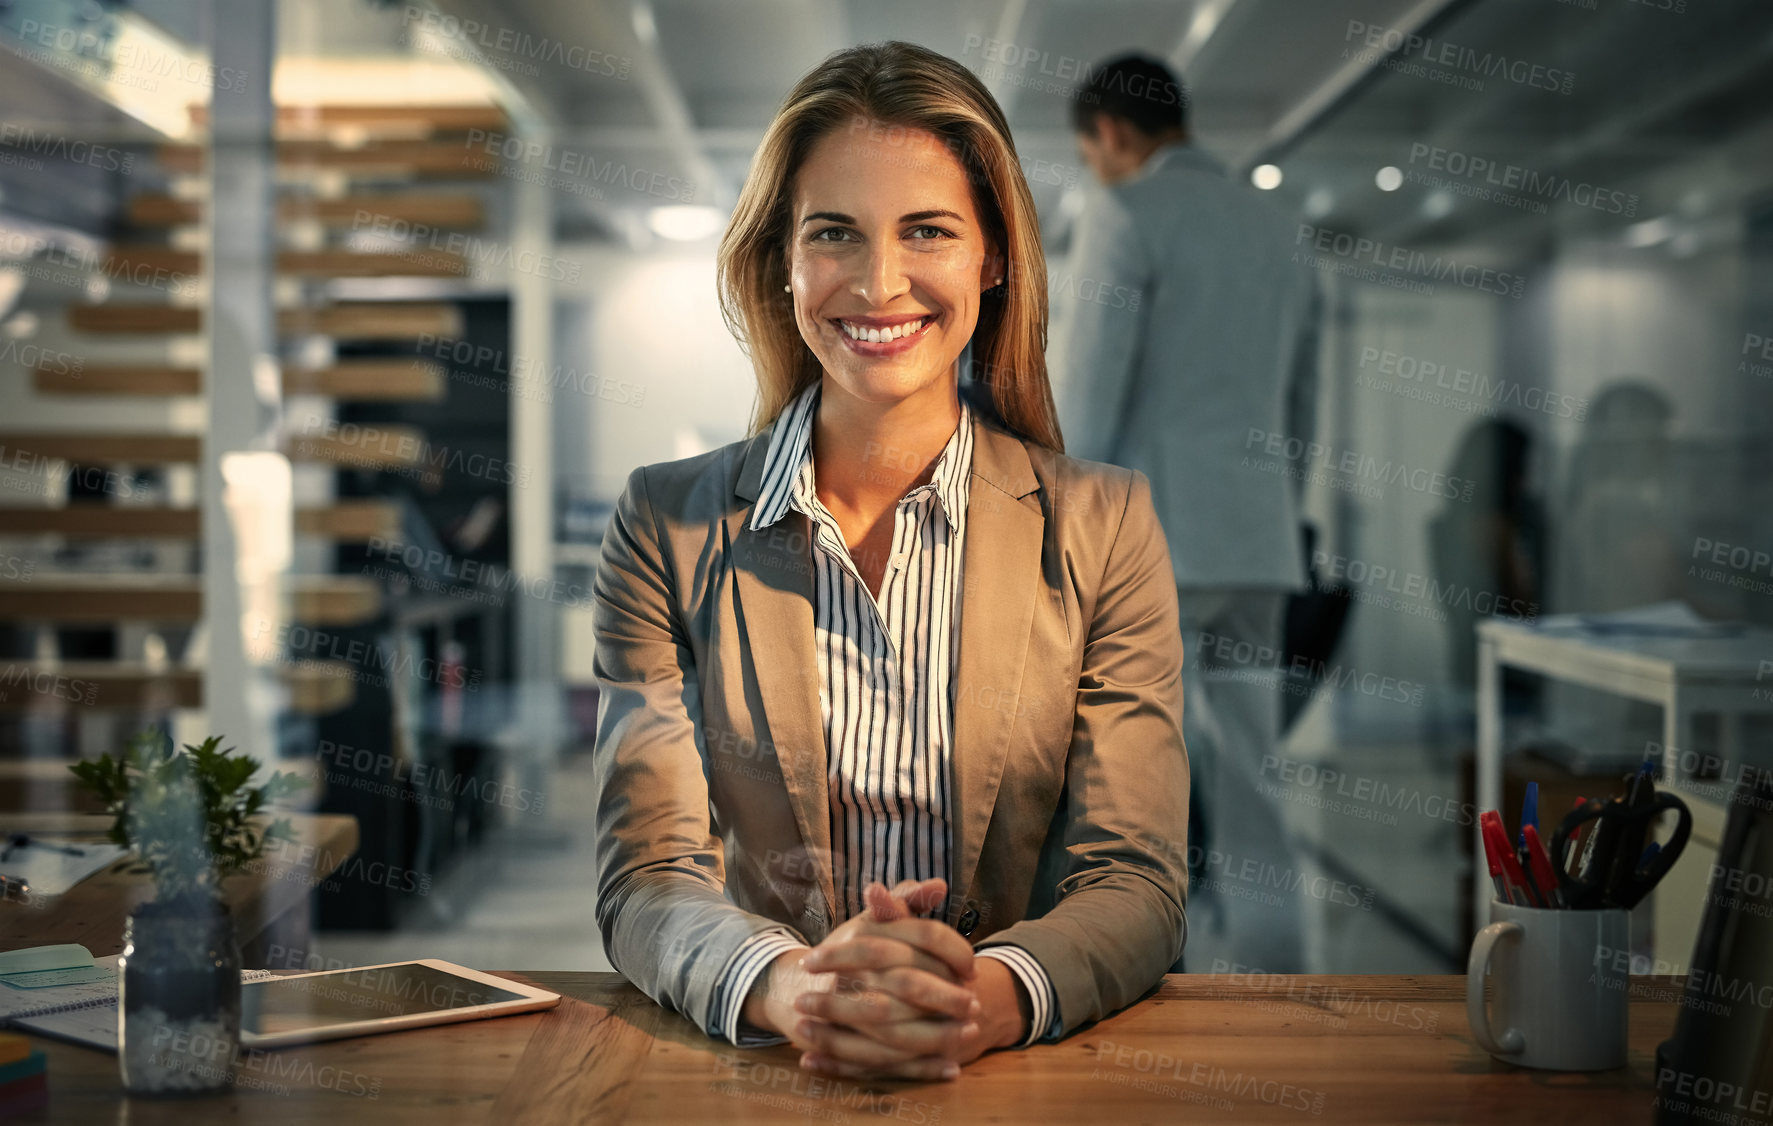 Buy stock photo Portrait of a businesswoman sitting at her desk during a late shift at work